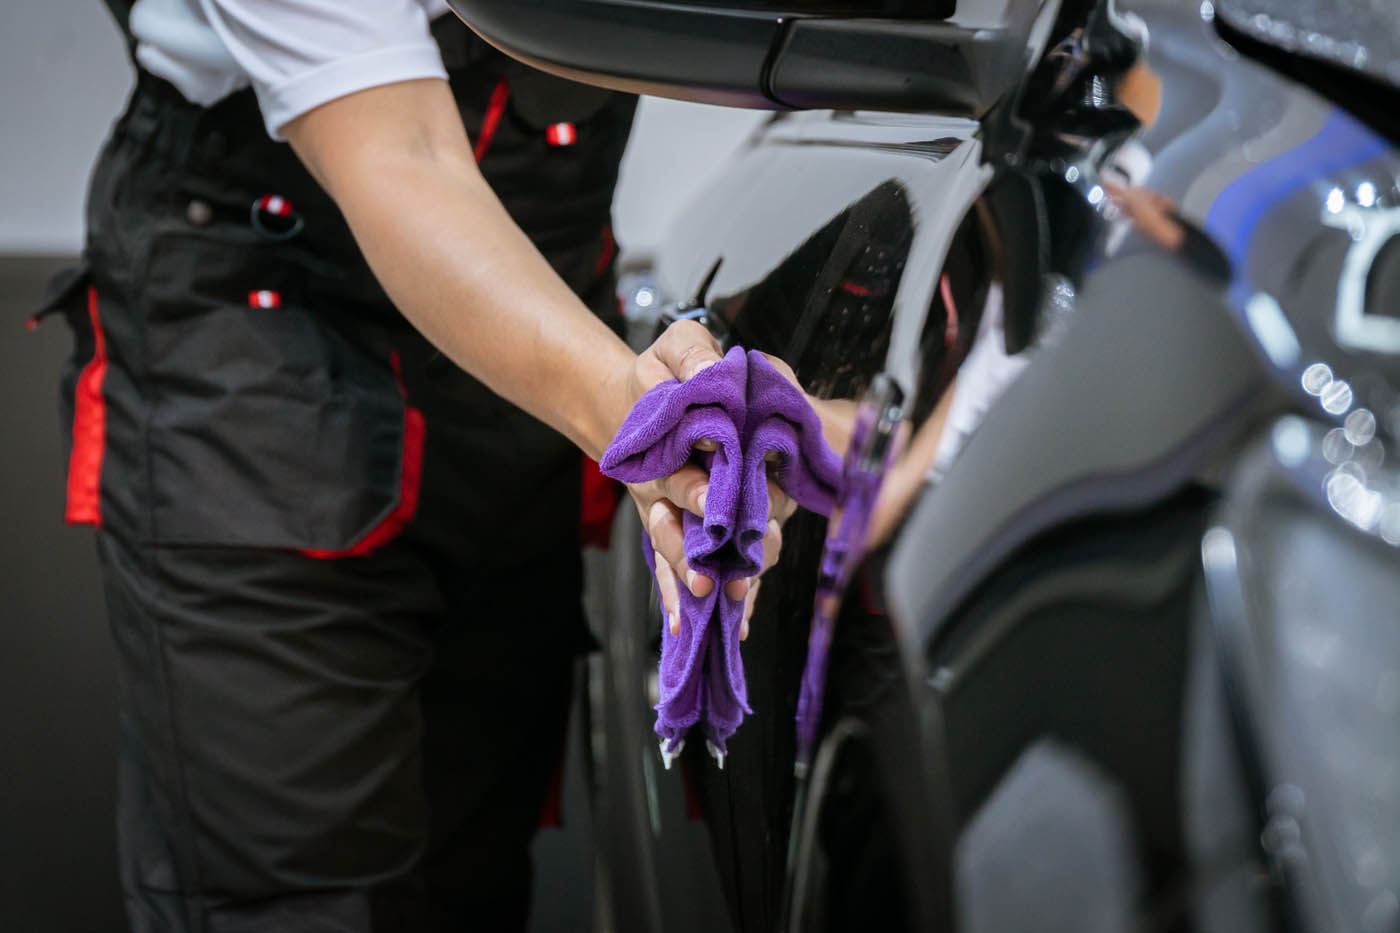 A Dapper Pros employee using a purple towel to provide an exterior car wash.